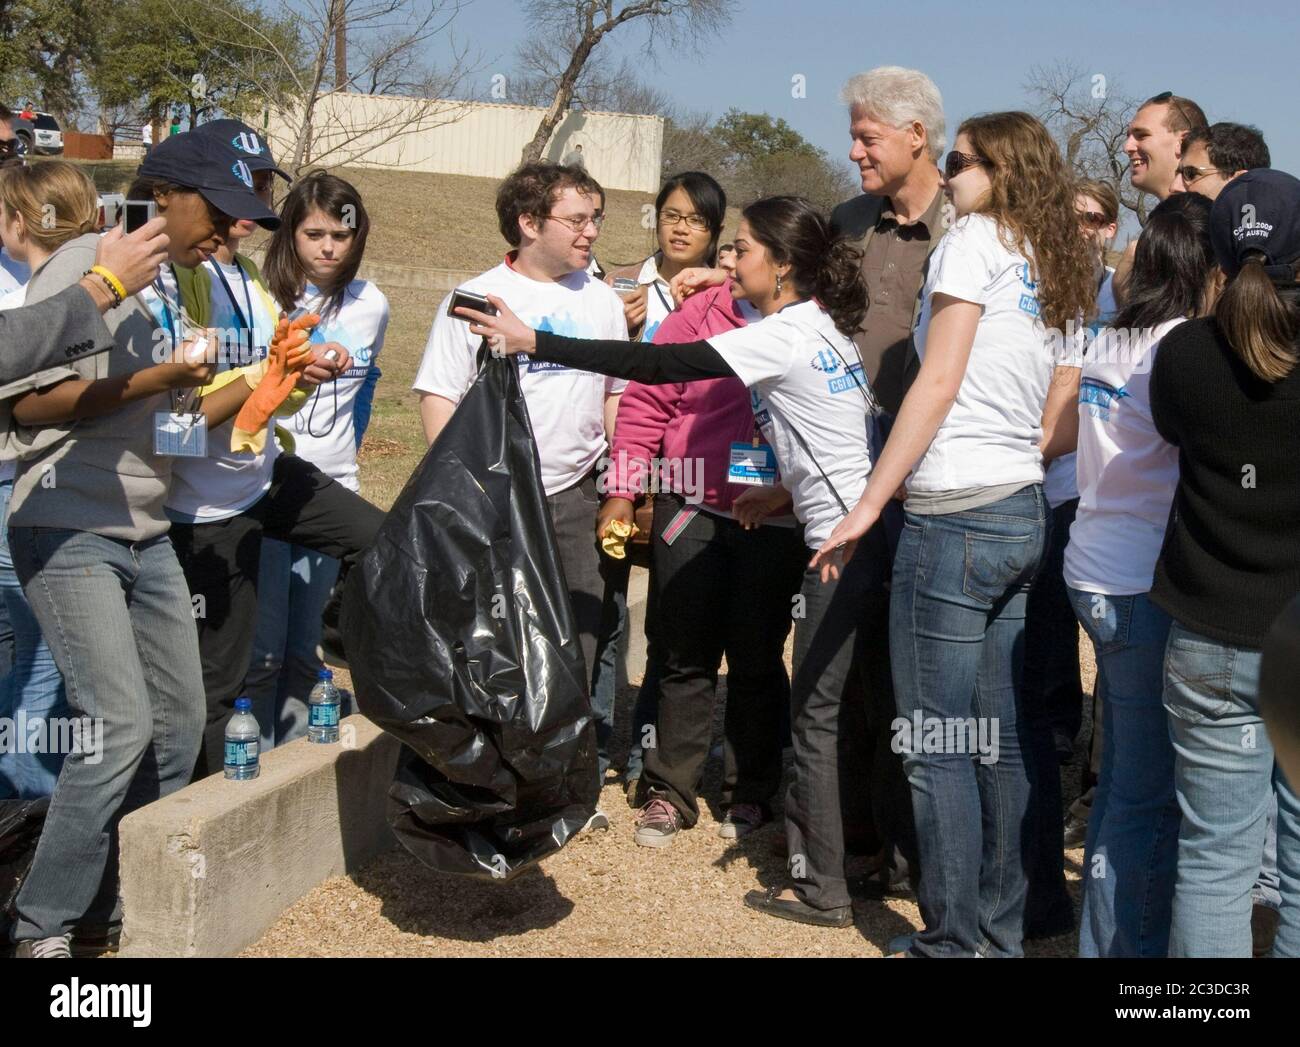 Austin, Texas USA, February 15, 2009: Former President Bill Clinton joins  student volunteers working on maintenance projects at a park as part of the Clinton Global Initiative's community service component. ©Marjorie Kamys Cotera/Daemmrich Photography Stock Photo